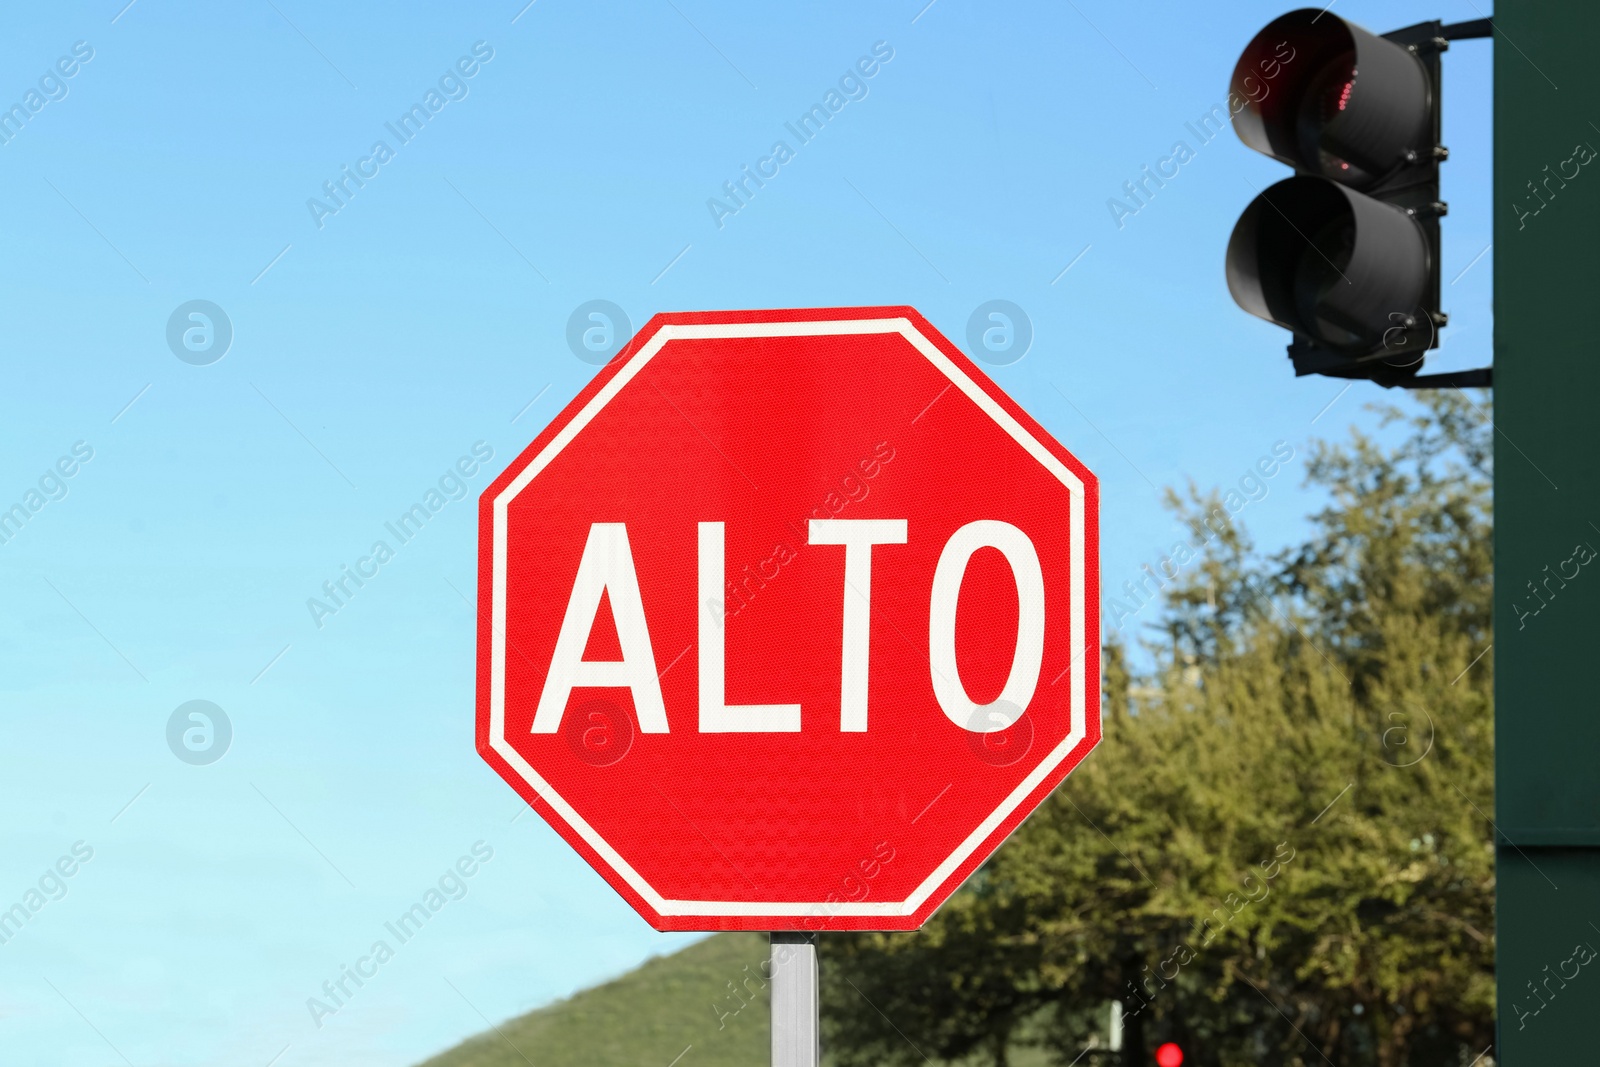 Photo of Red Stop warning road sign in Mexico on city street